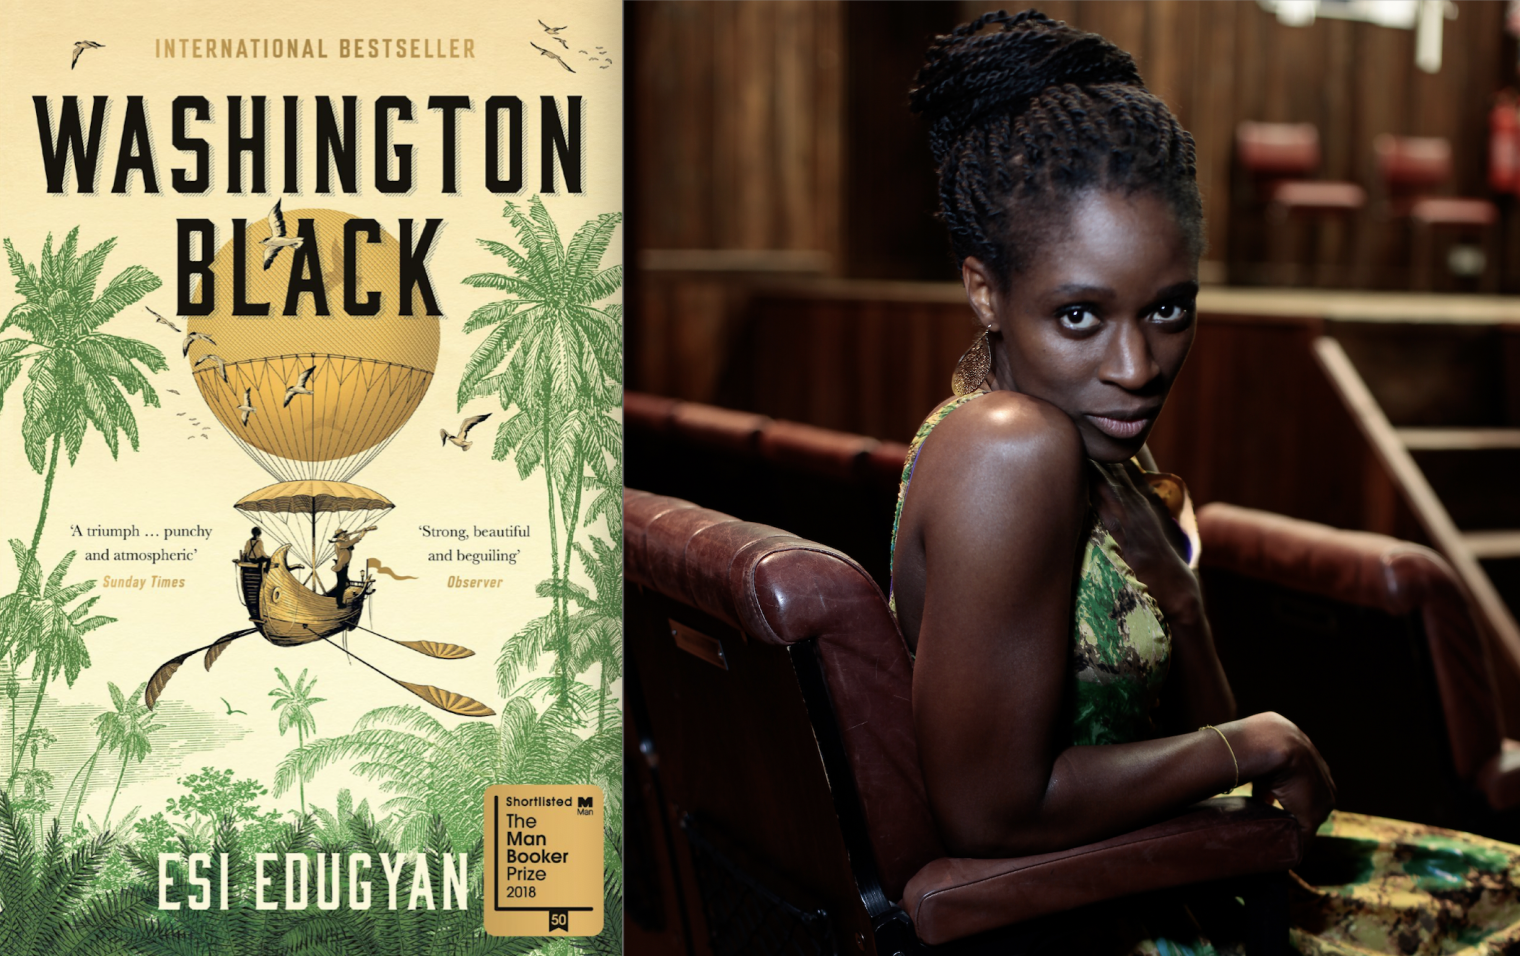 Sharon Duncan-Brewster joins the cast for the highly anticipated Hulu series Washington Black